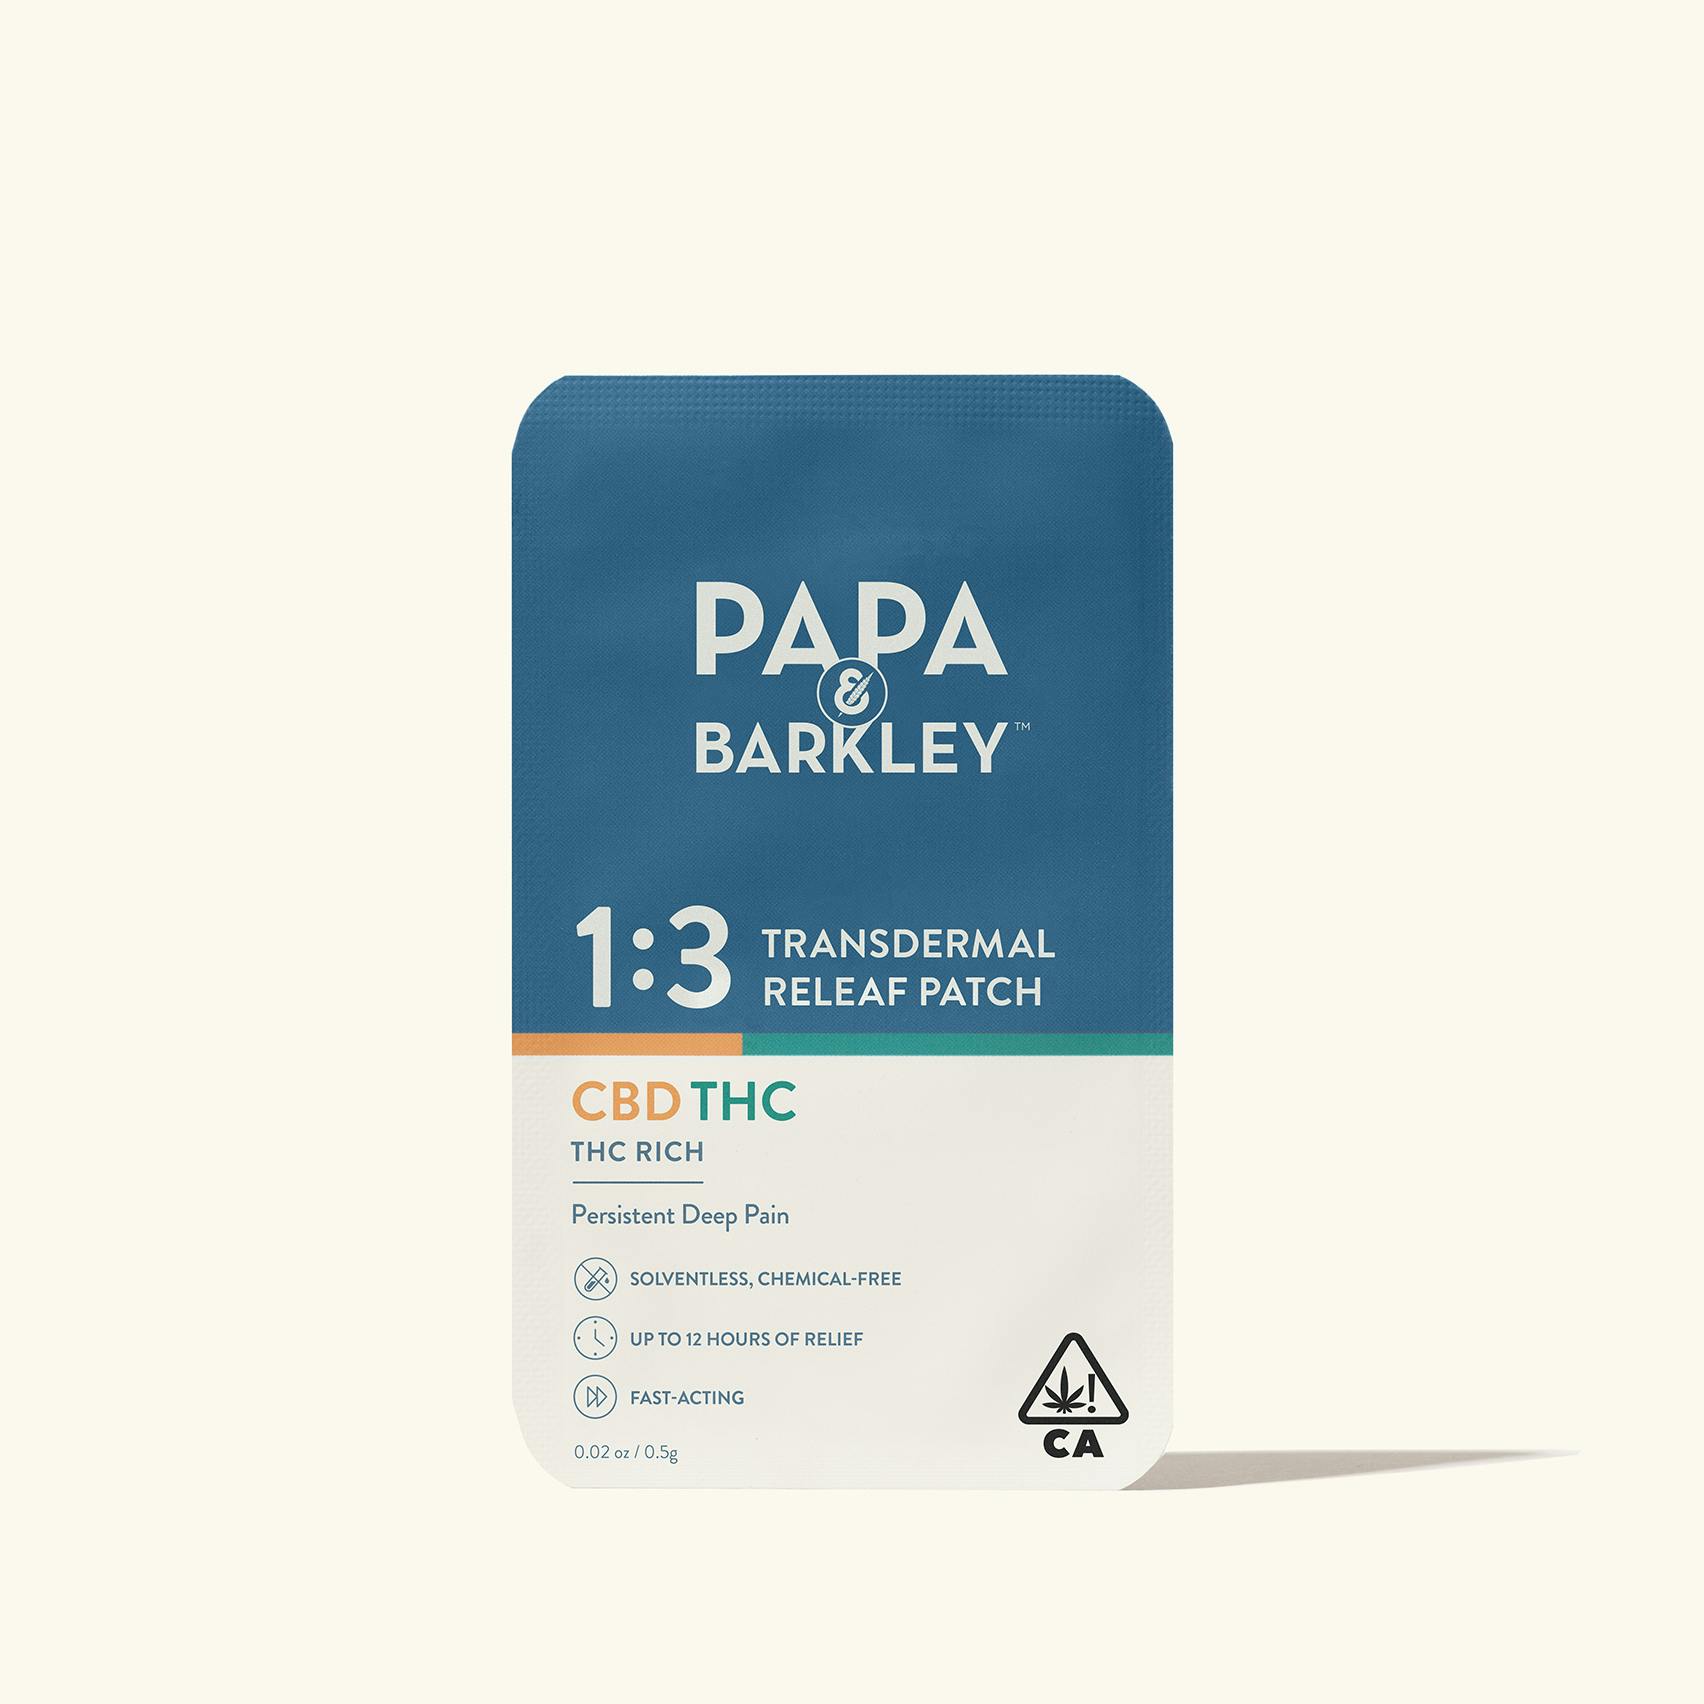 PB CA 1to3 Patch Pouch Product Image PDP Main Gallery Cream 01